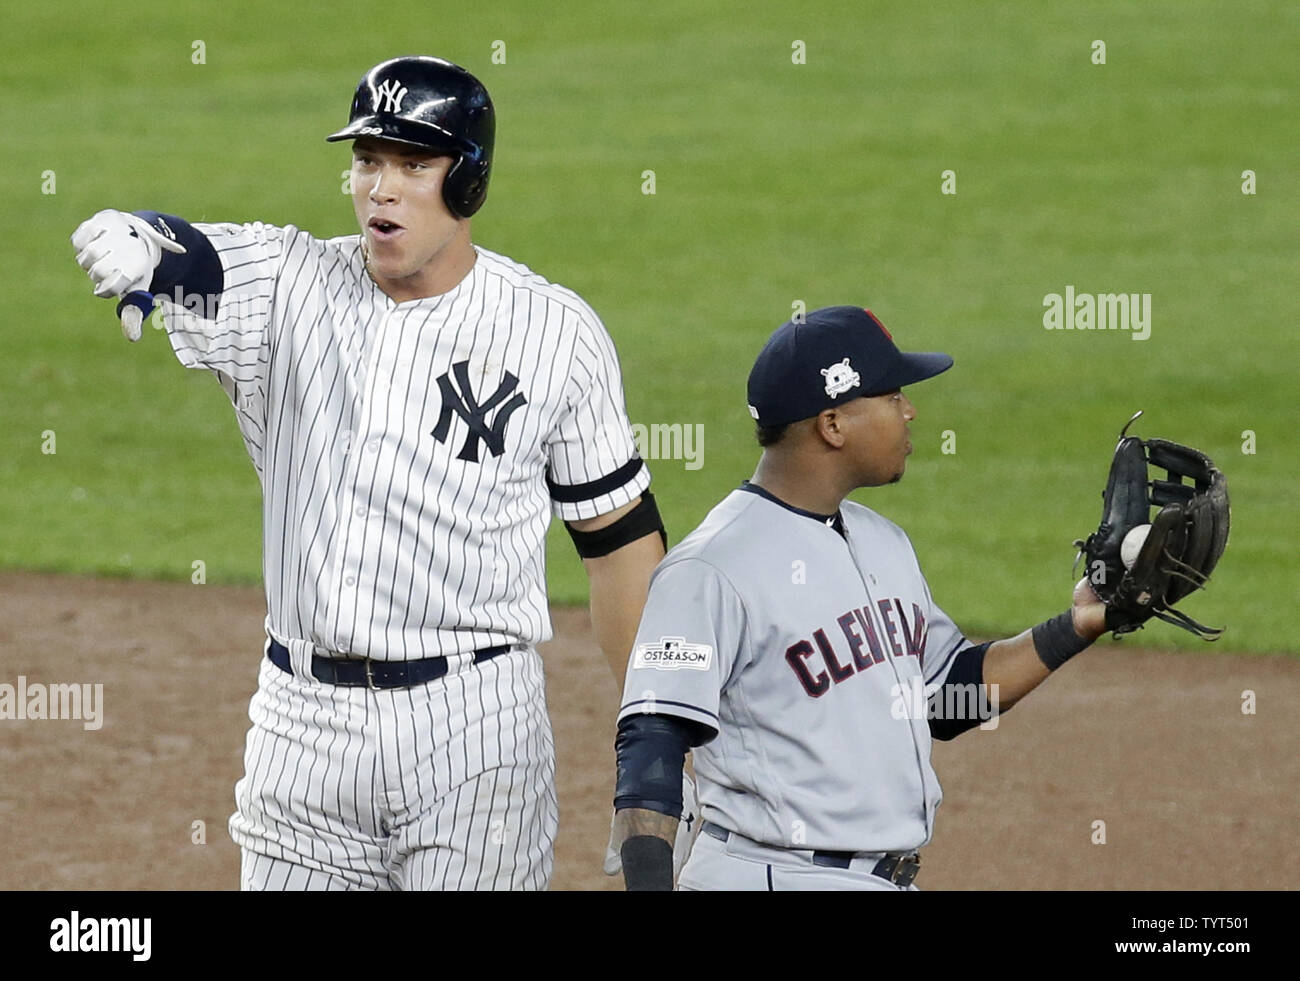 Cleveland Indians Jose Ramirez stands next to New York Yankees Aaron Judge  who puts his thumb down when he reacts after driving in 2 runs with a  double in the 3rd inning